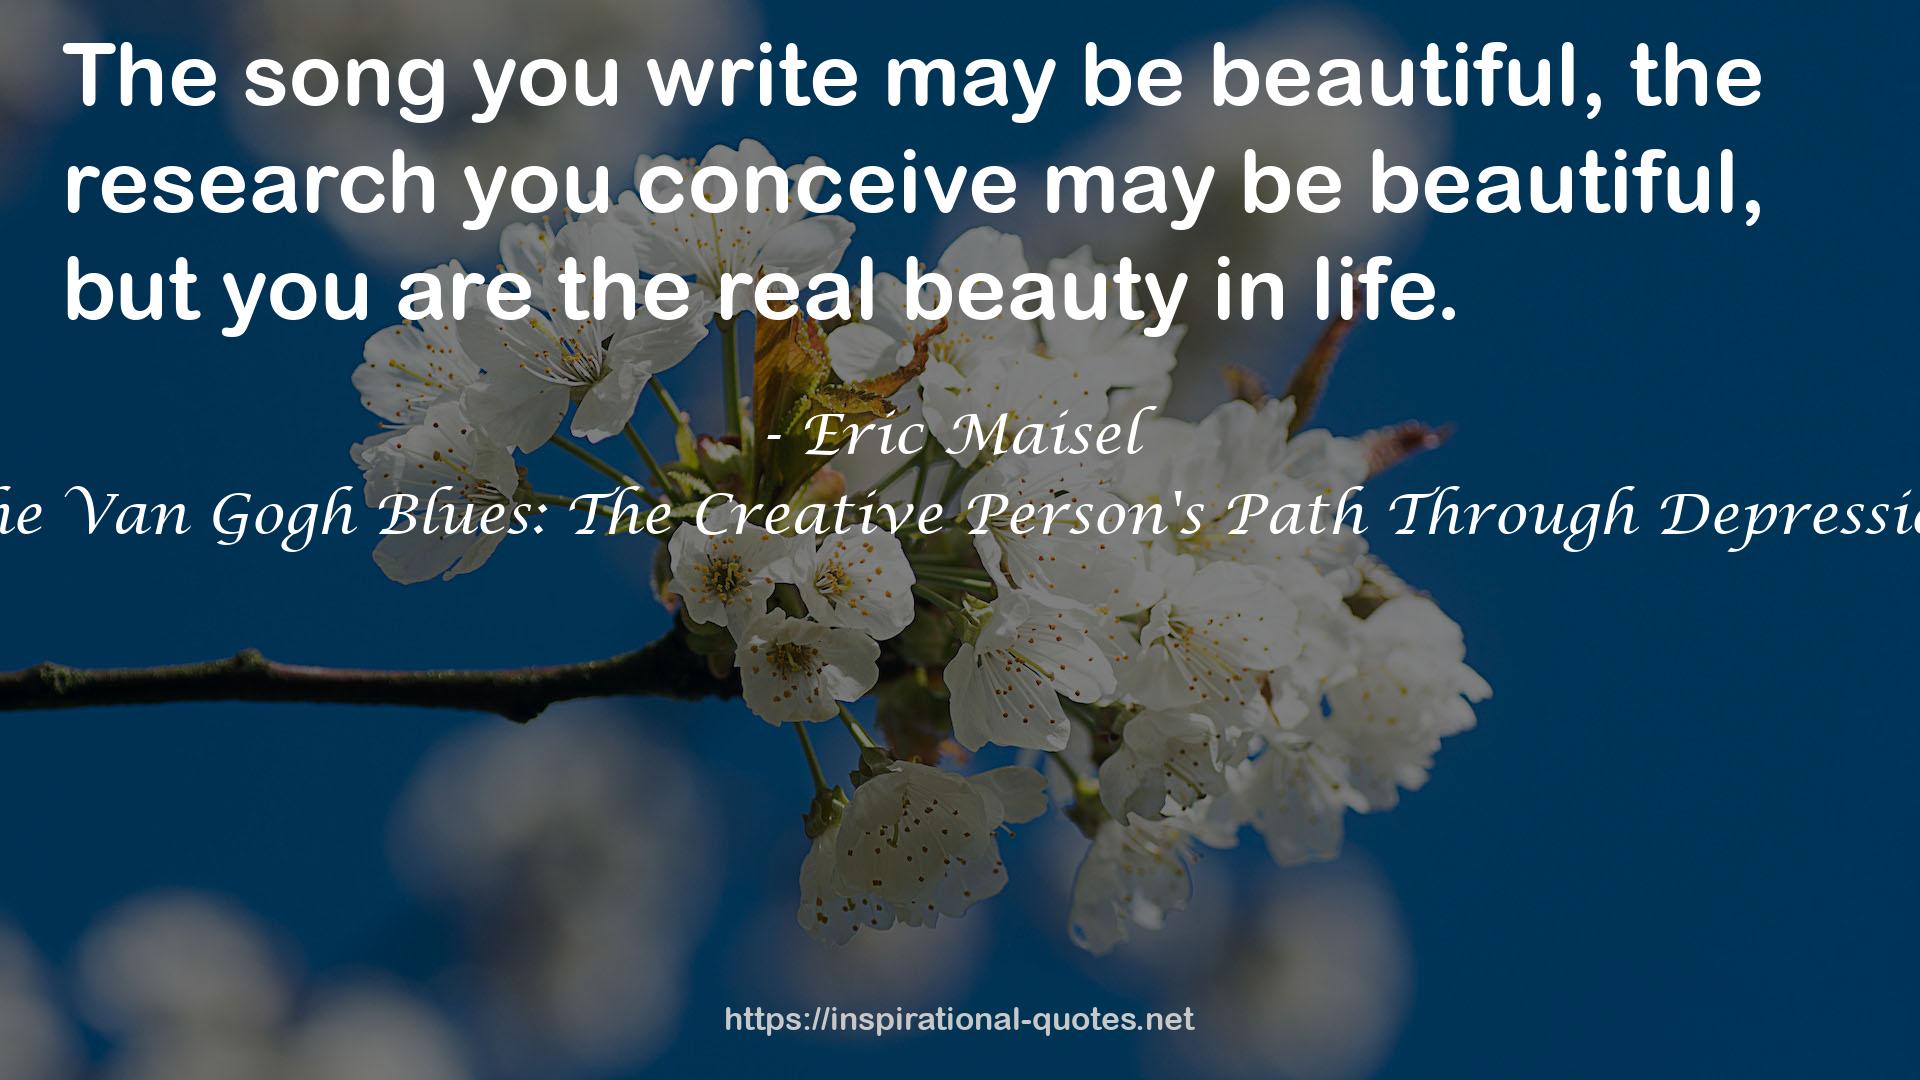 The Van Gogh Blues: The Creative Person's Path Through Depression QUOTES